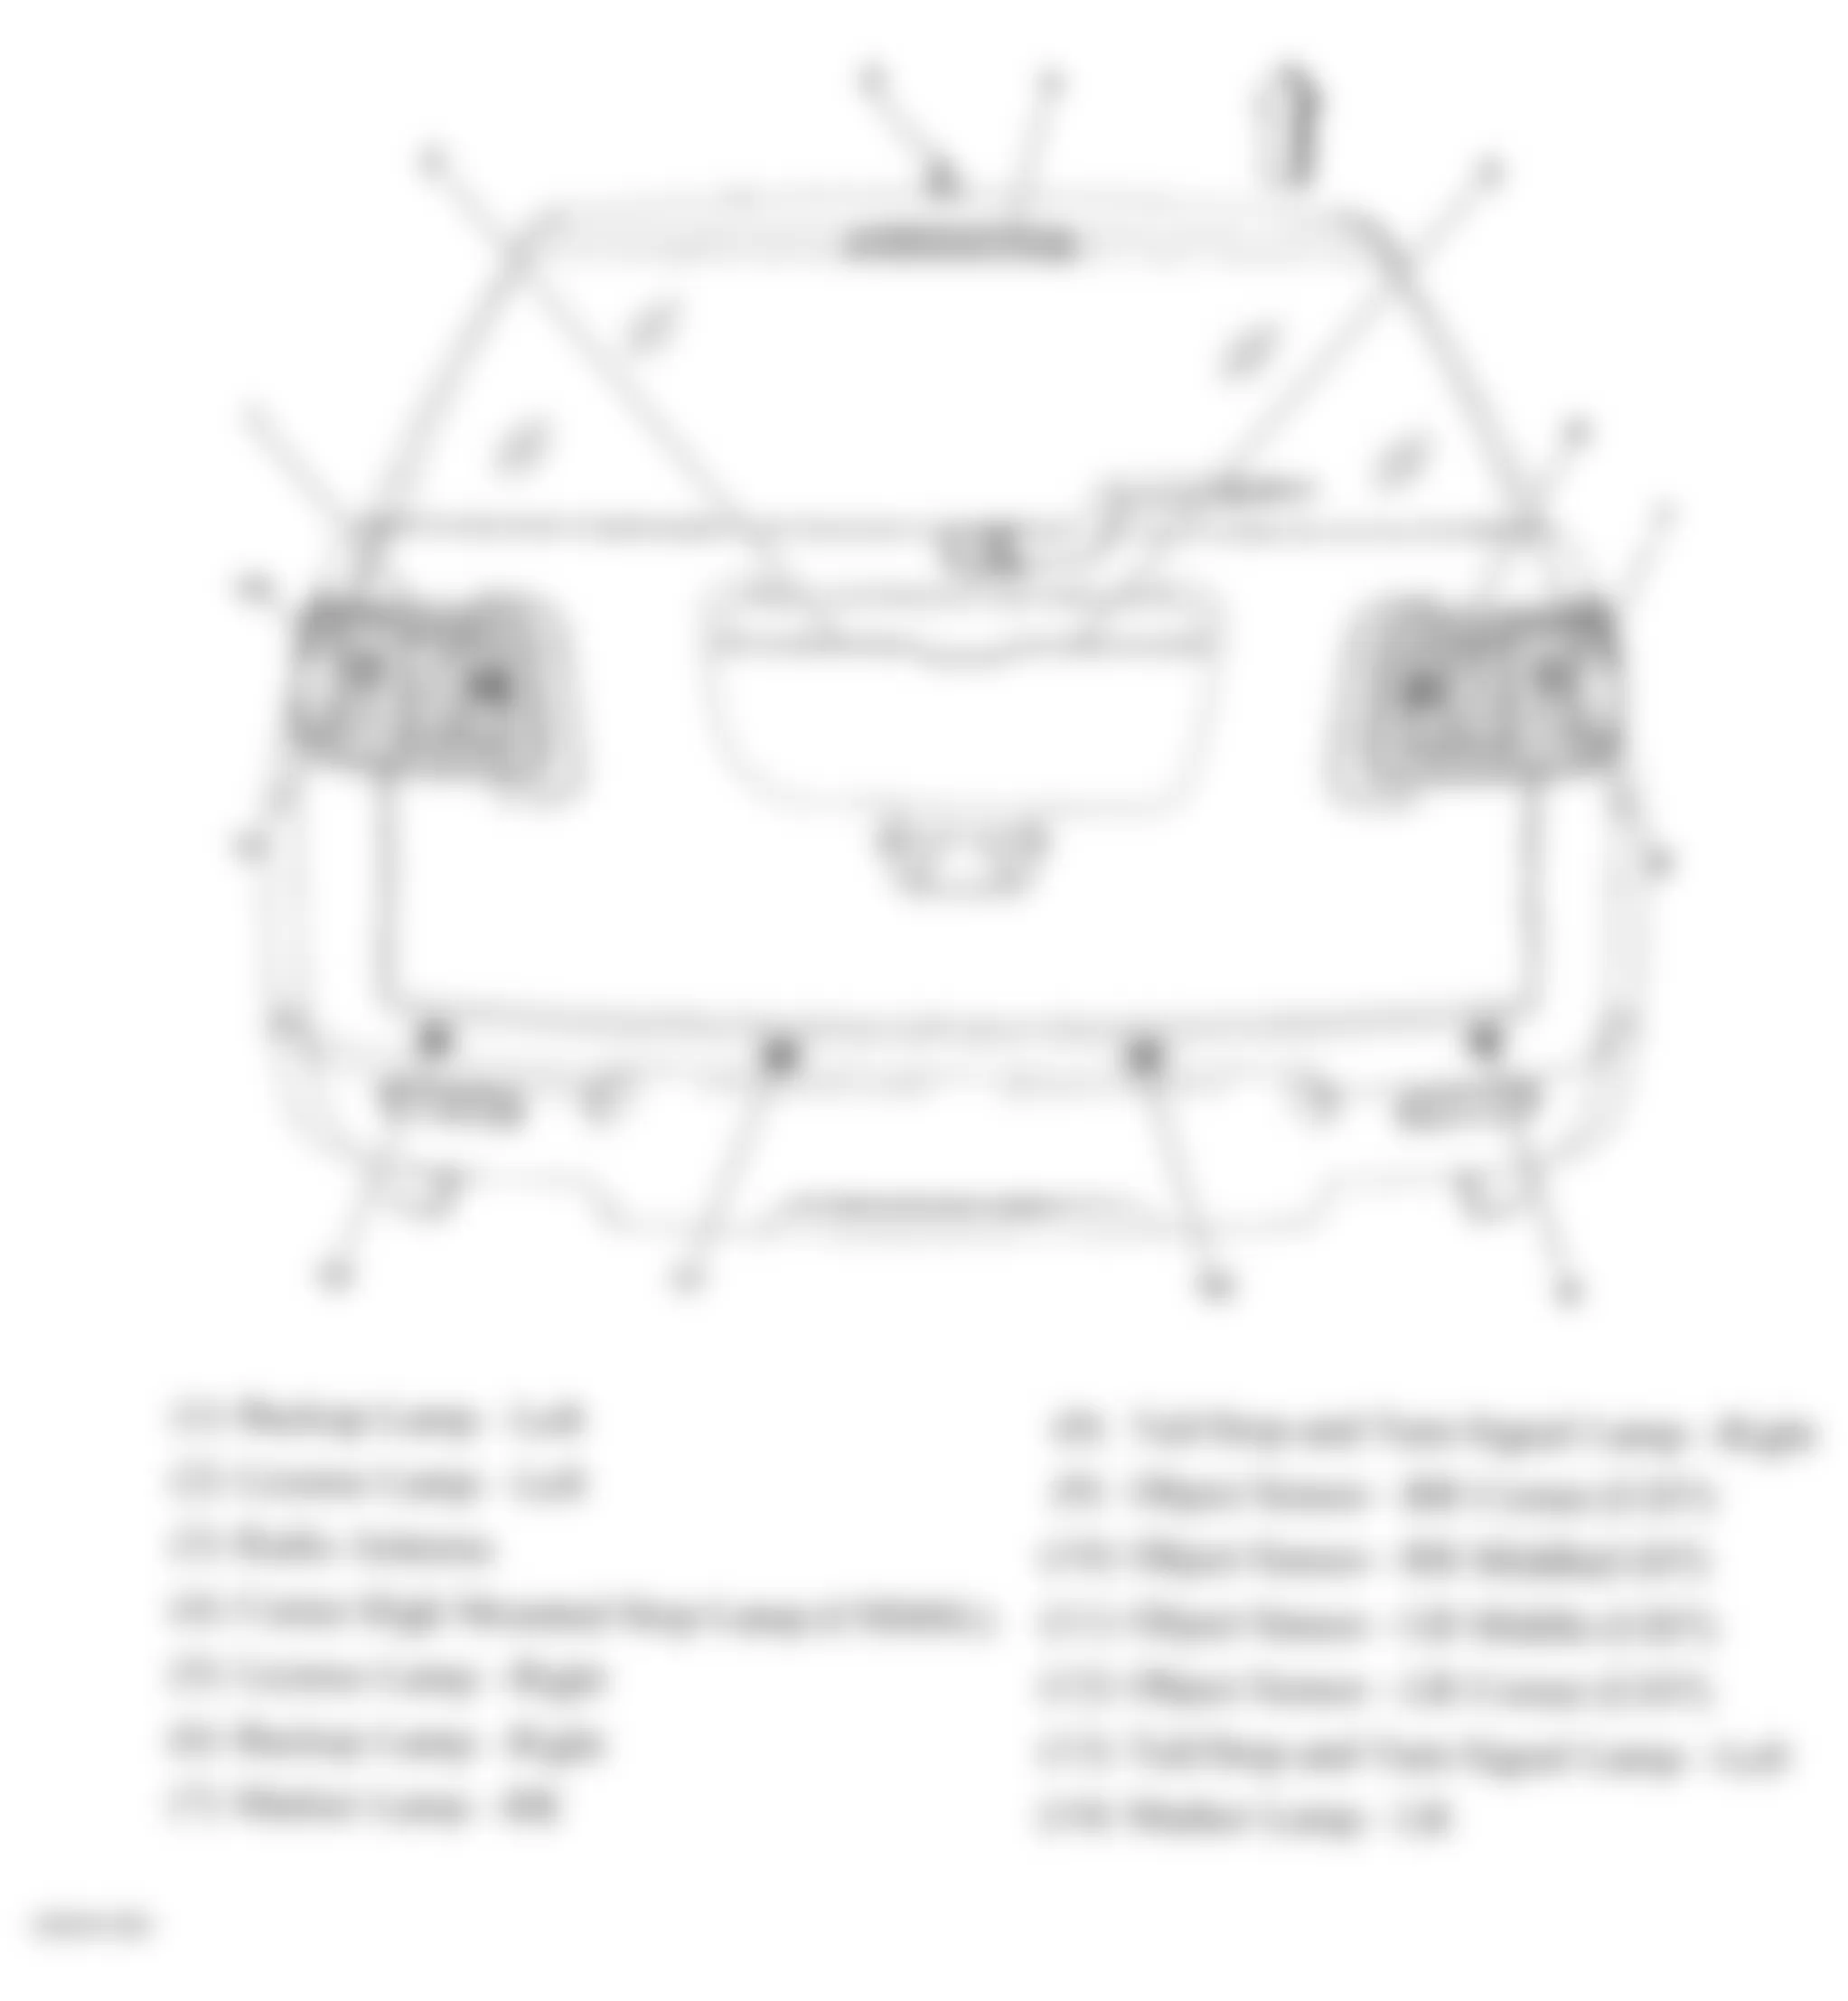 GMC Acadia SLT 2009 - Component Locations -  Rear Of Vehicle (Acadia & Outlook)